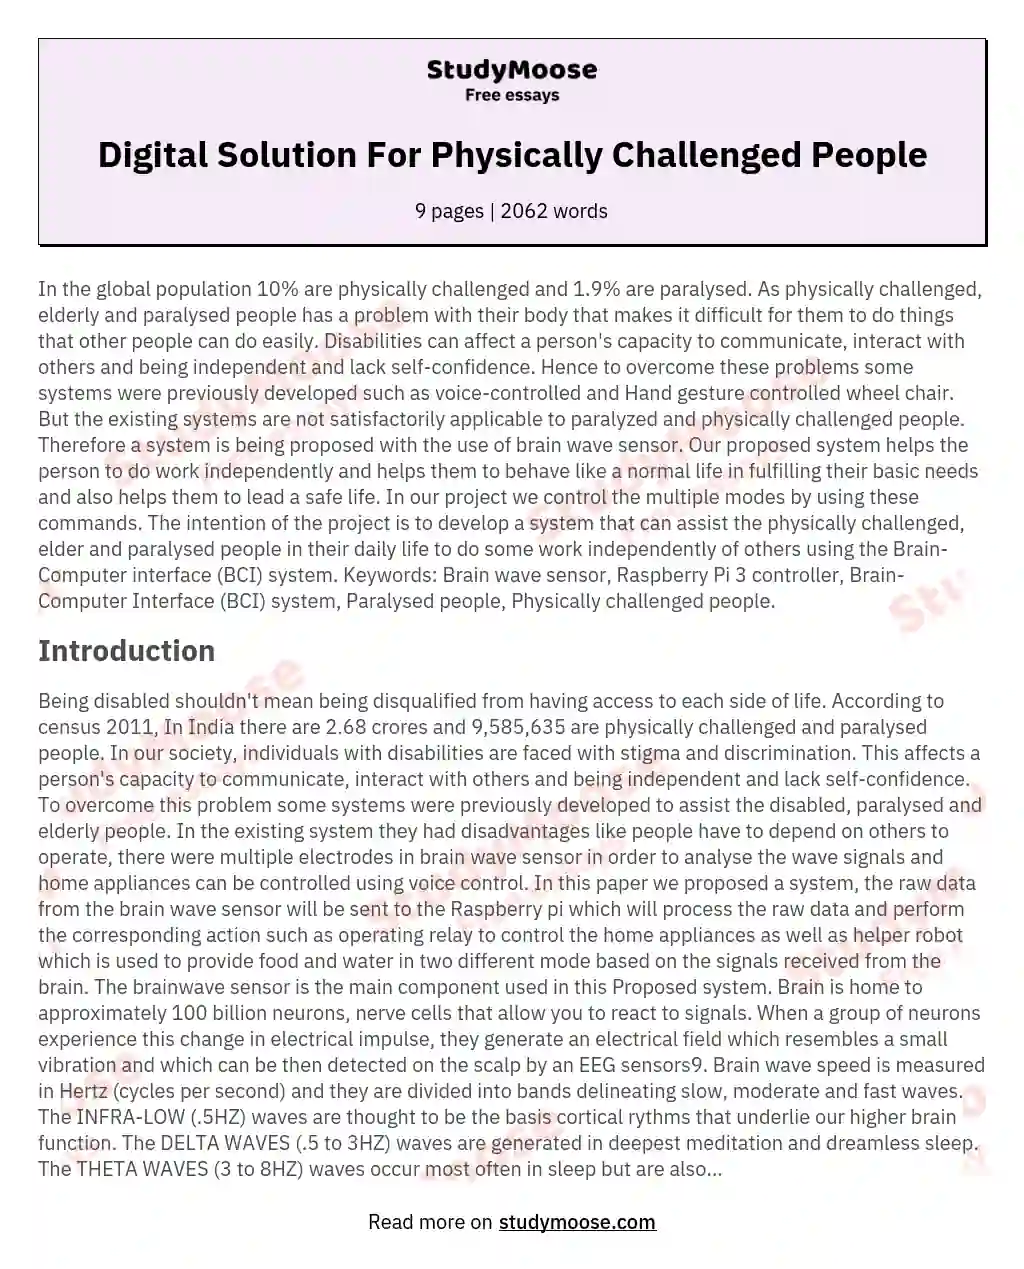 Digital Solution For Physically Challenged People essay